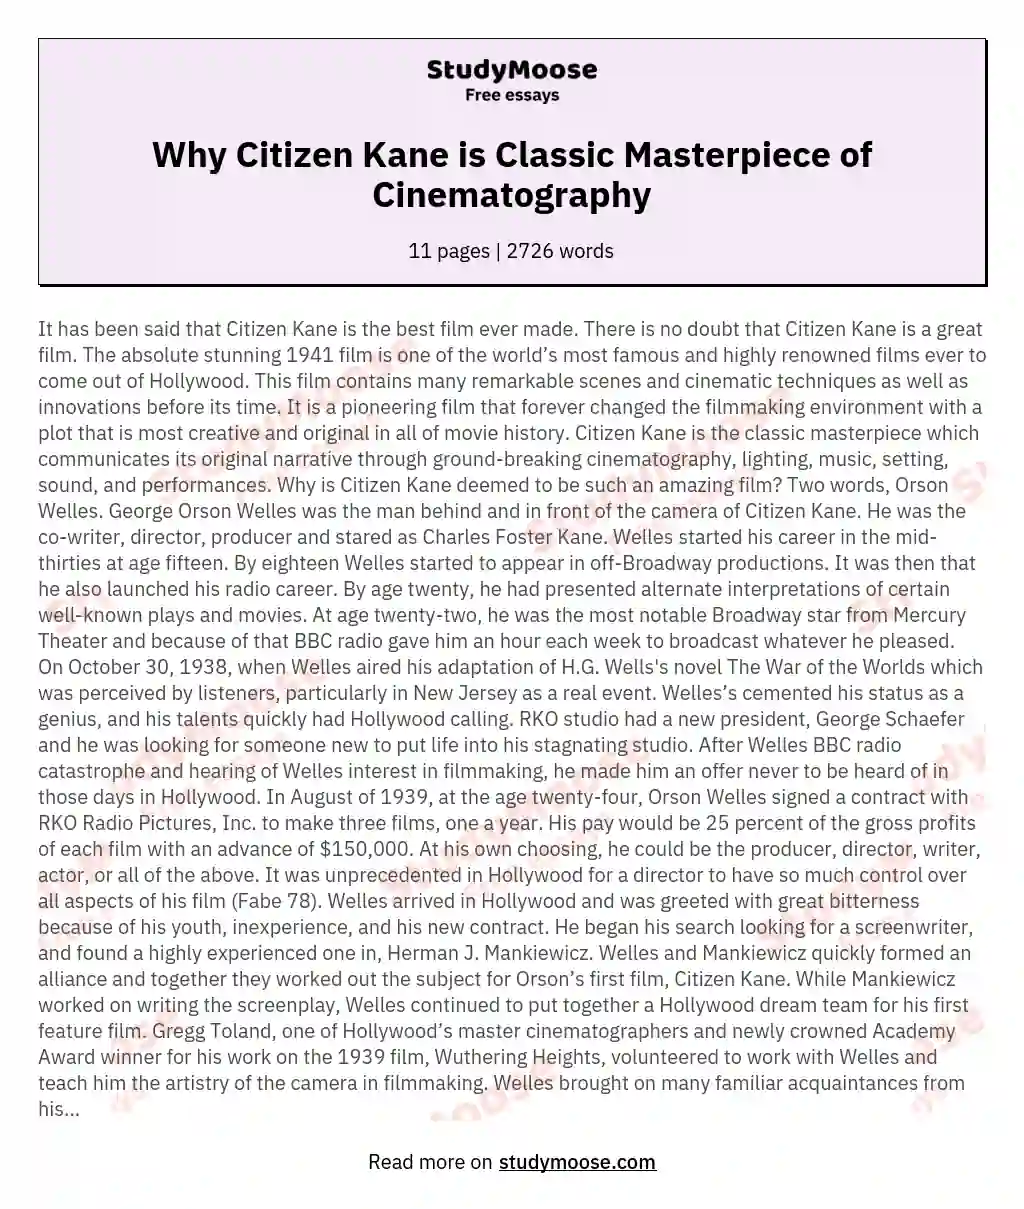 Why Citizen Kane is Classic Masterpiece of Cinematography essay